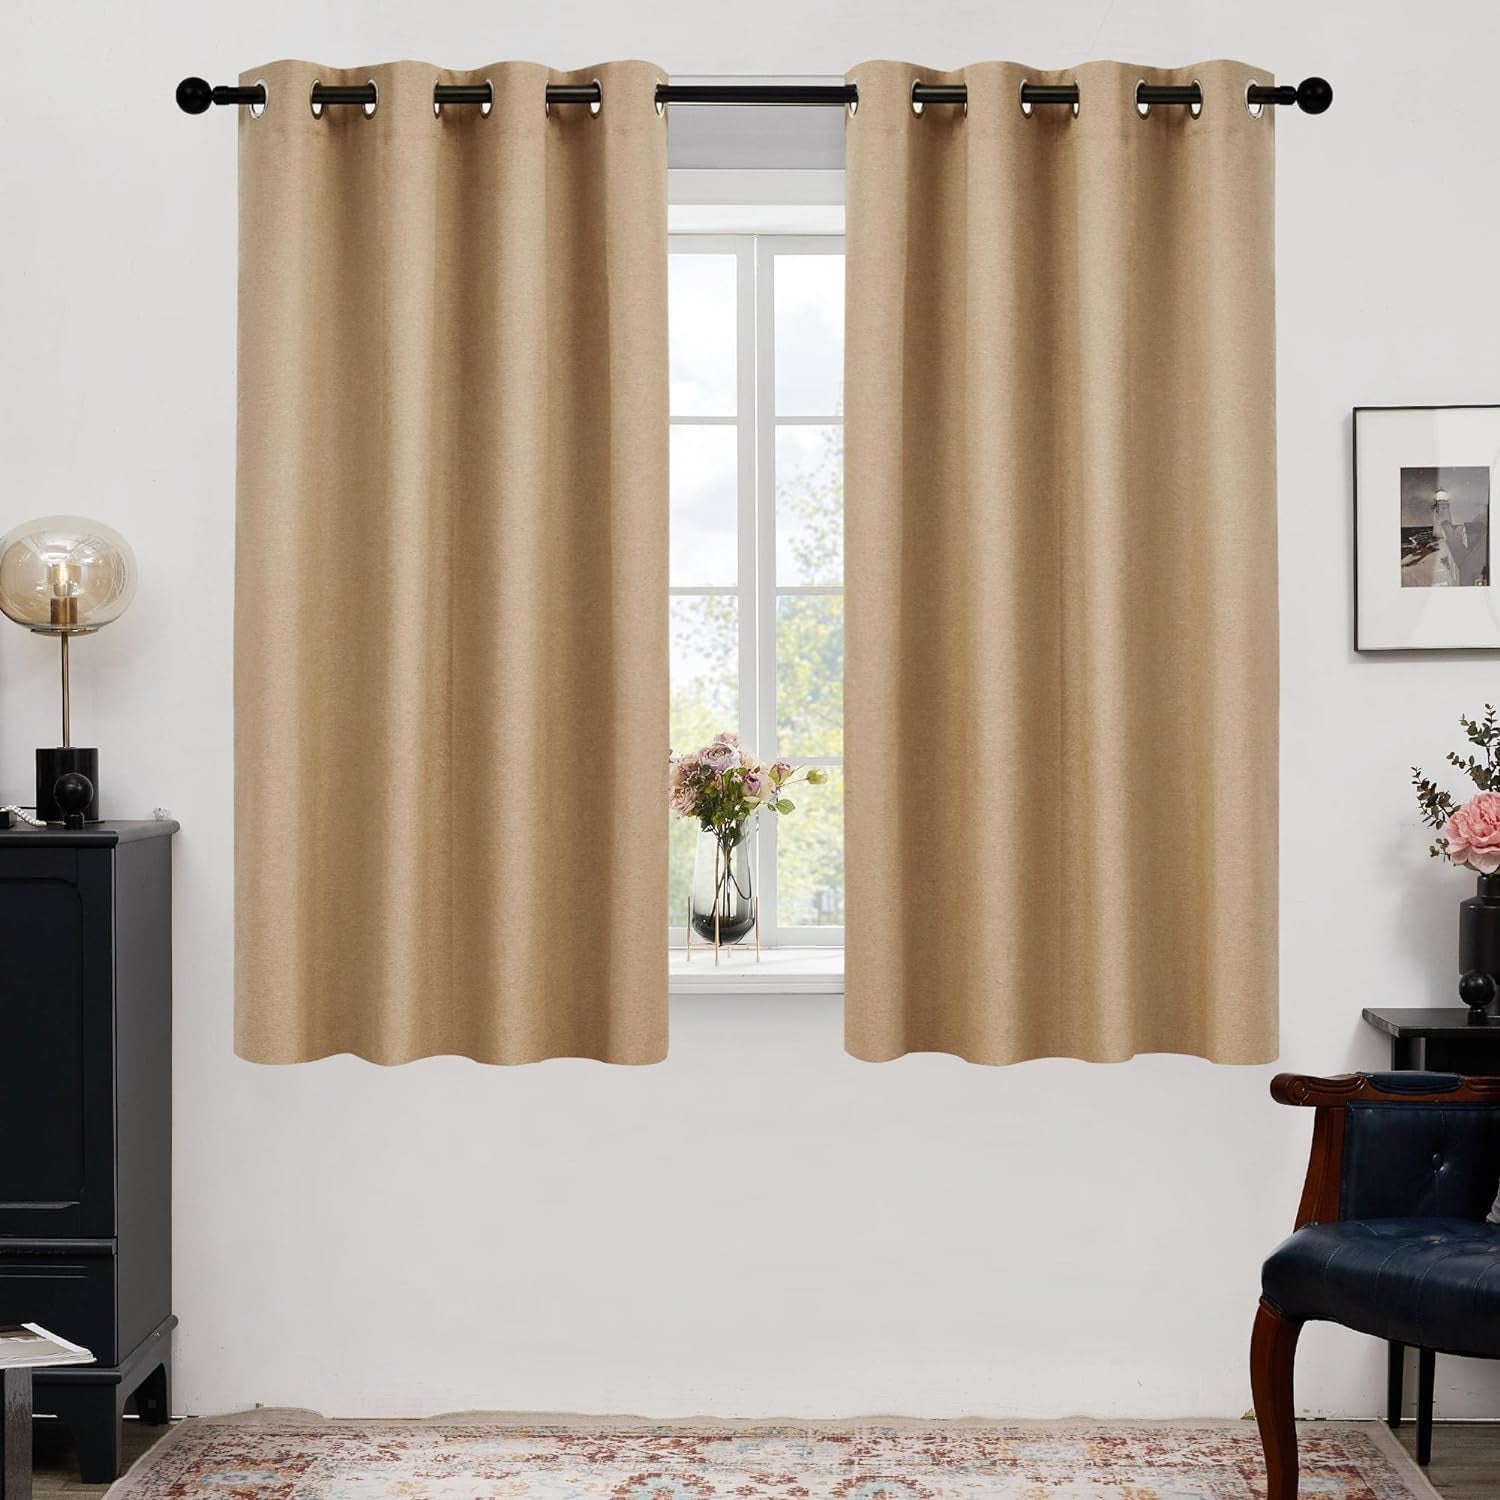 Deconovo 100% Blackout Curtains, Linen Noise Reducing Curtains for Bedroom, Thermal Insulated Living Room Curtain Drapes for Windows (Grey, 2 Panels, 52X72 Inch)  Deconovo   